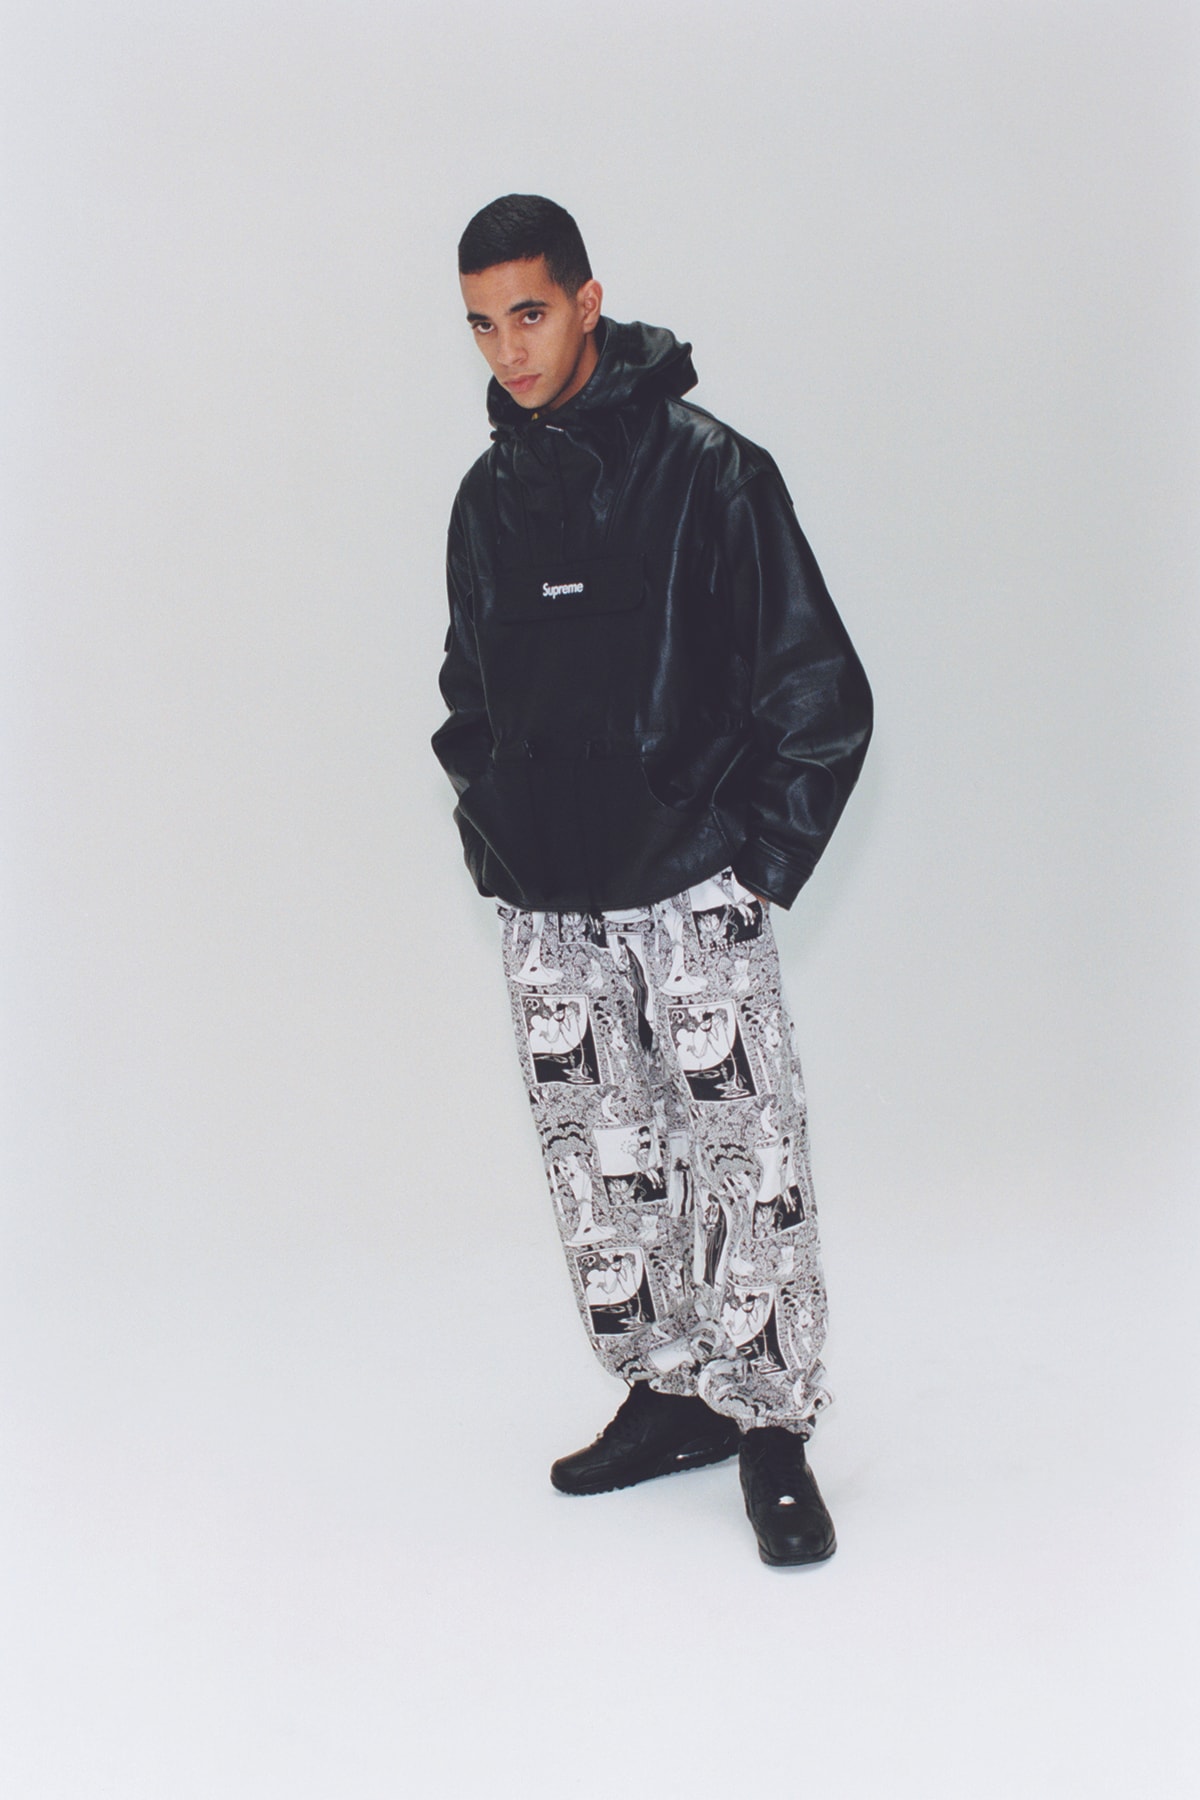 Supreme Fall/Winter 2018 Editorial Shoot Box Logo Graphic Pants Leather Jacket